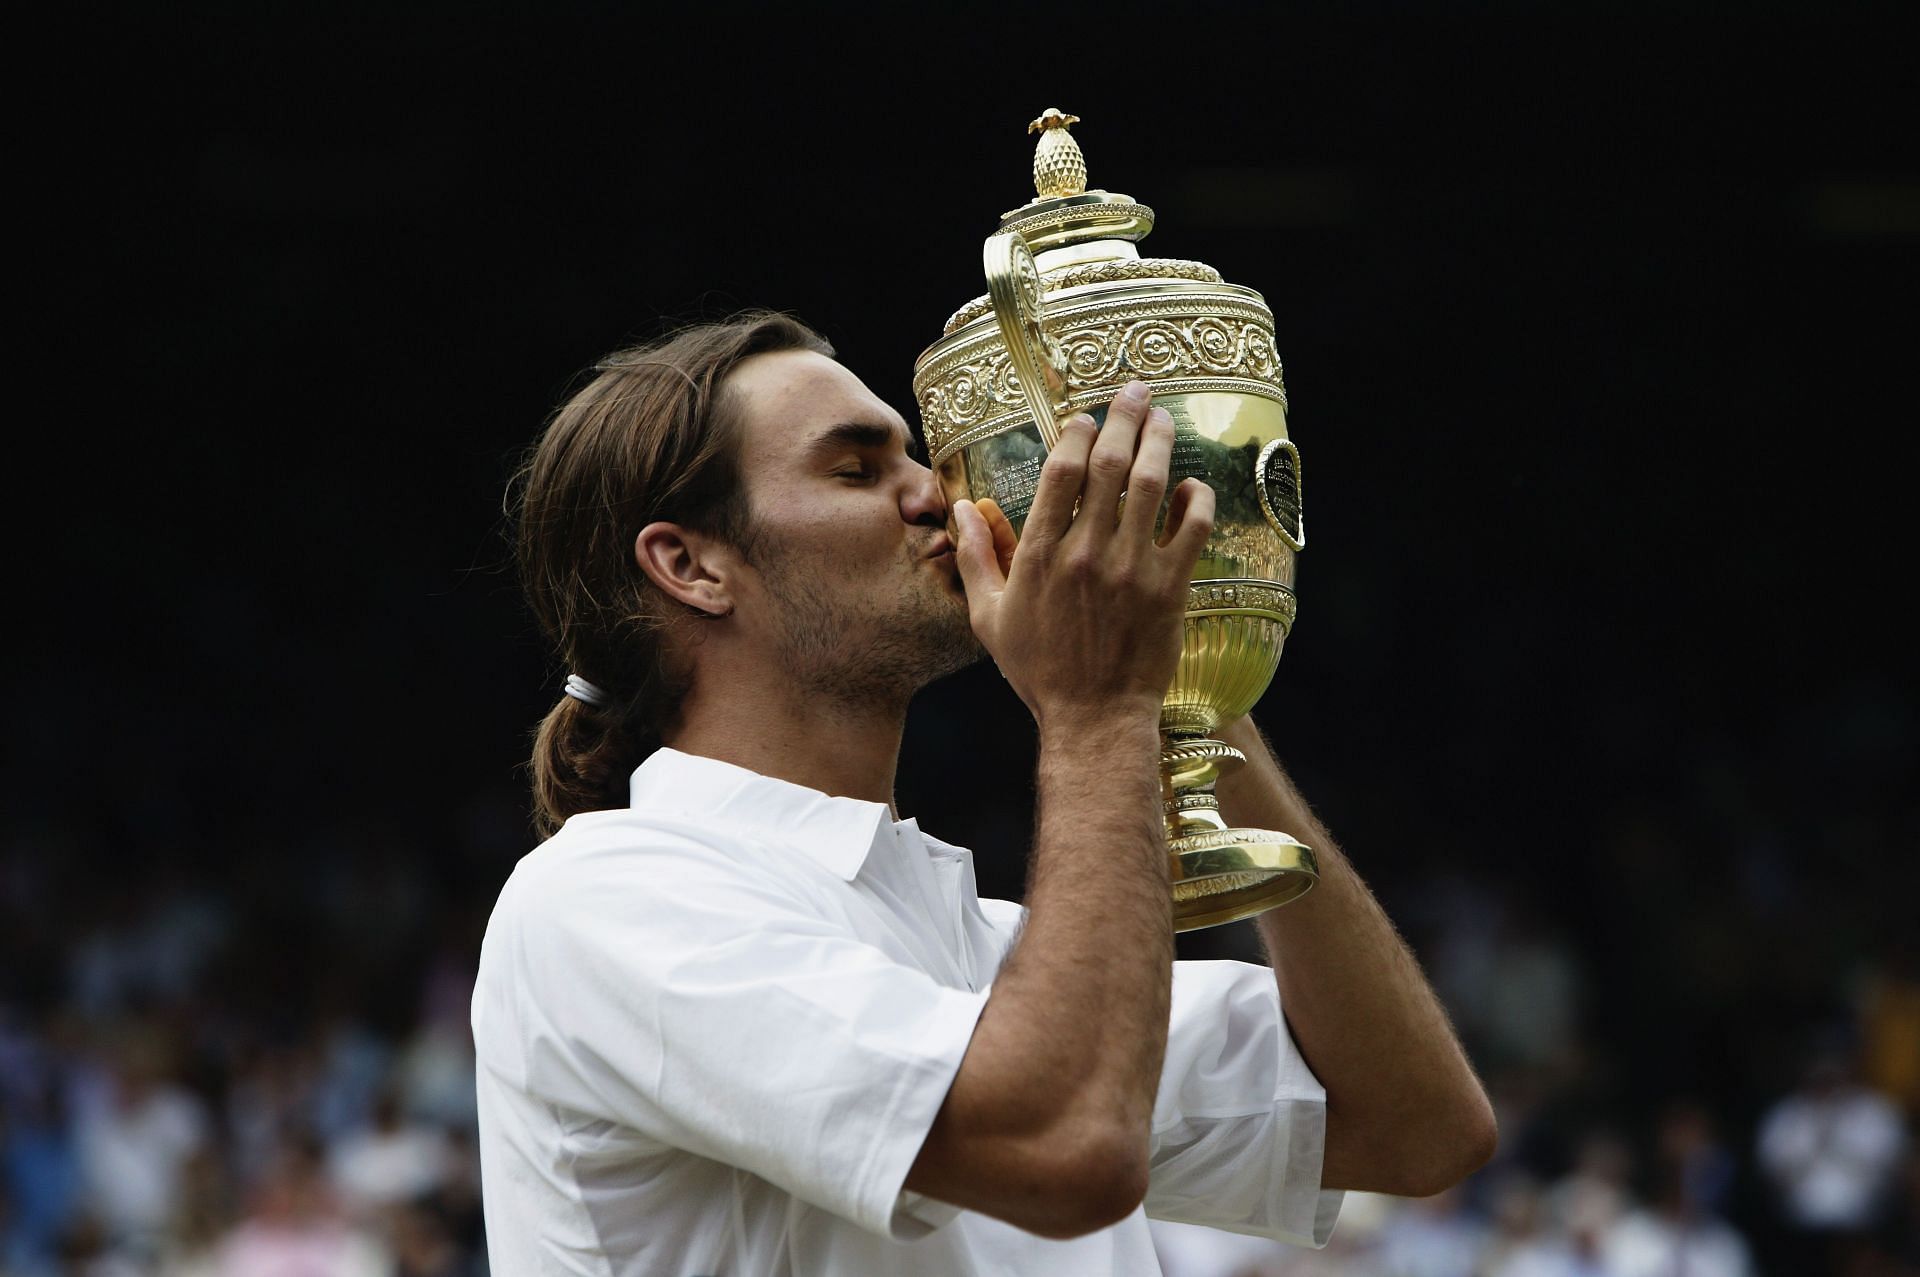 Roger Federer with the 2003 Wimbledon trophy (Source: Getty)